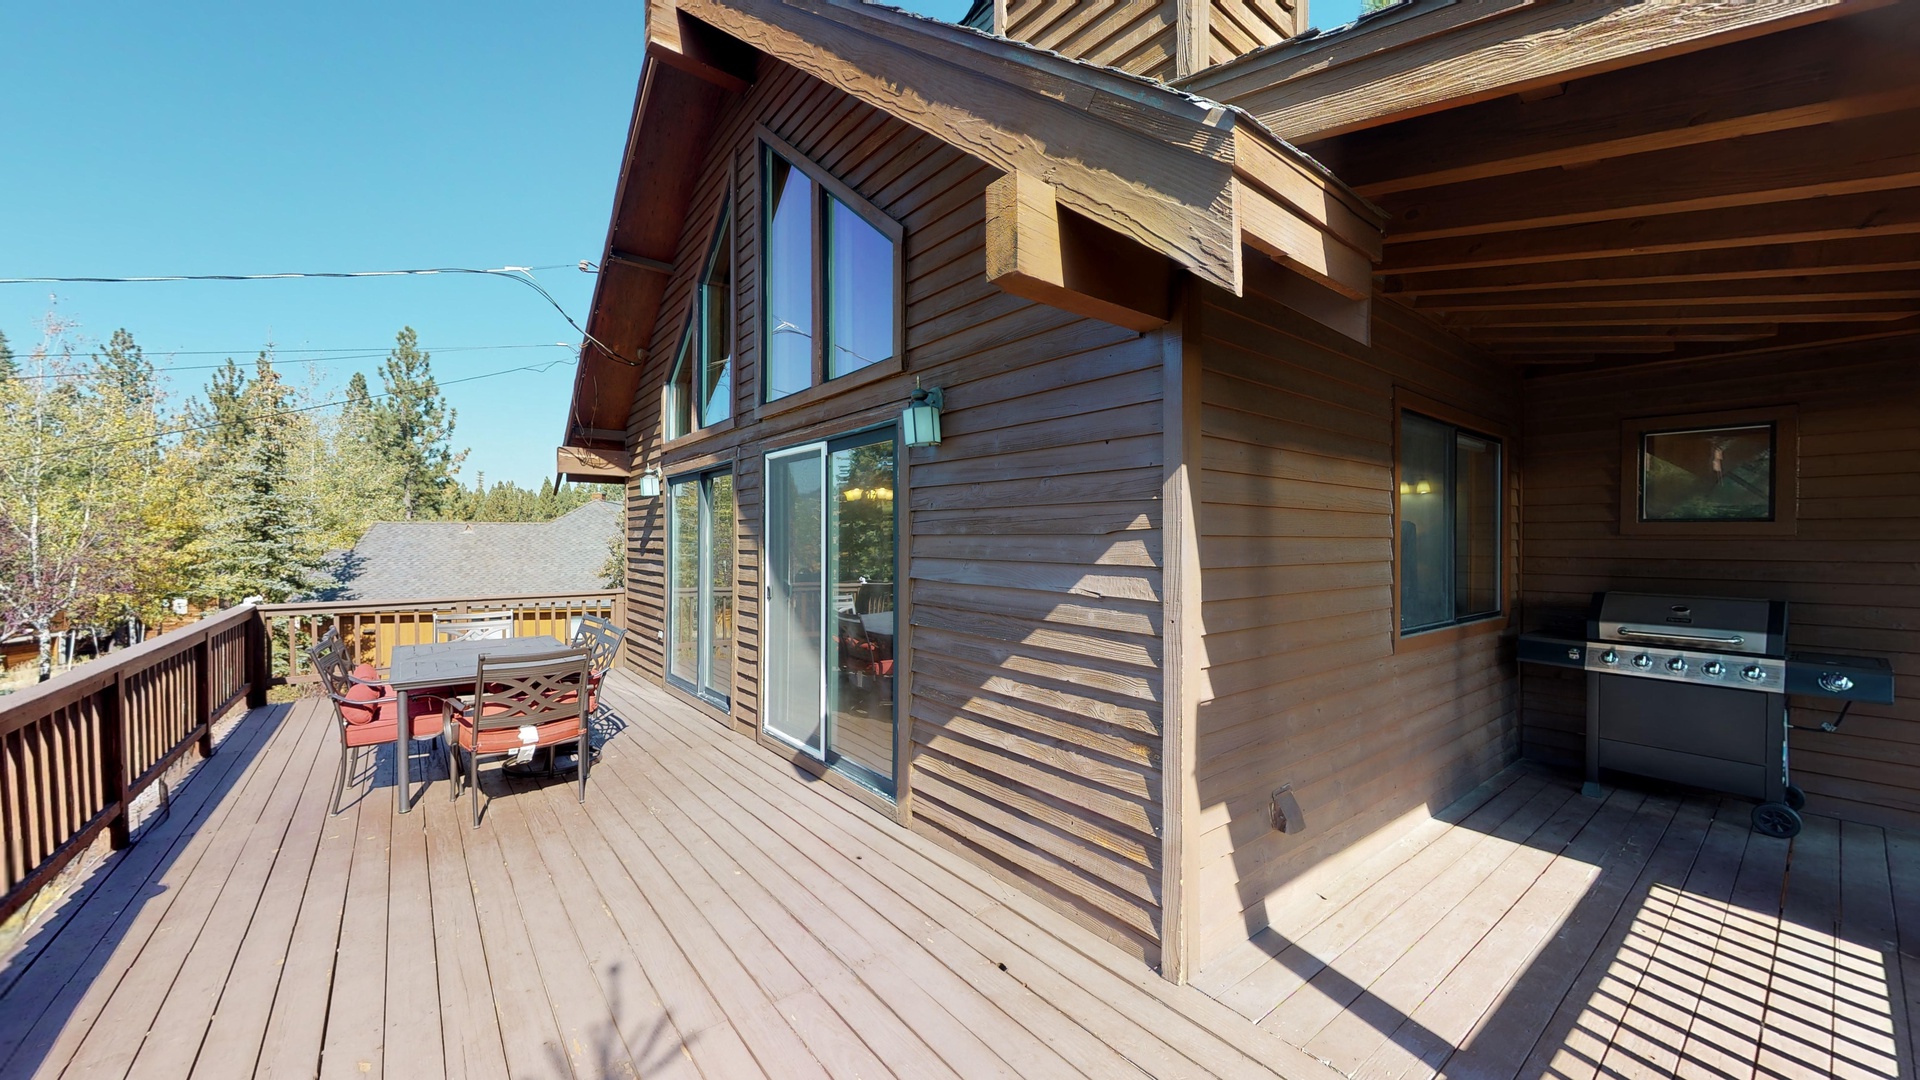 Outdoor View of our Cabin Rental in Truckee: Wolfgang Vacation Cabin